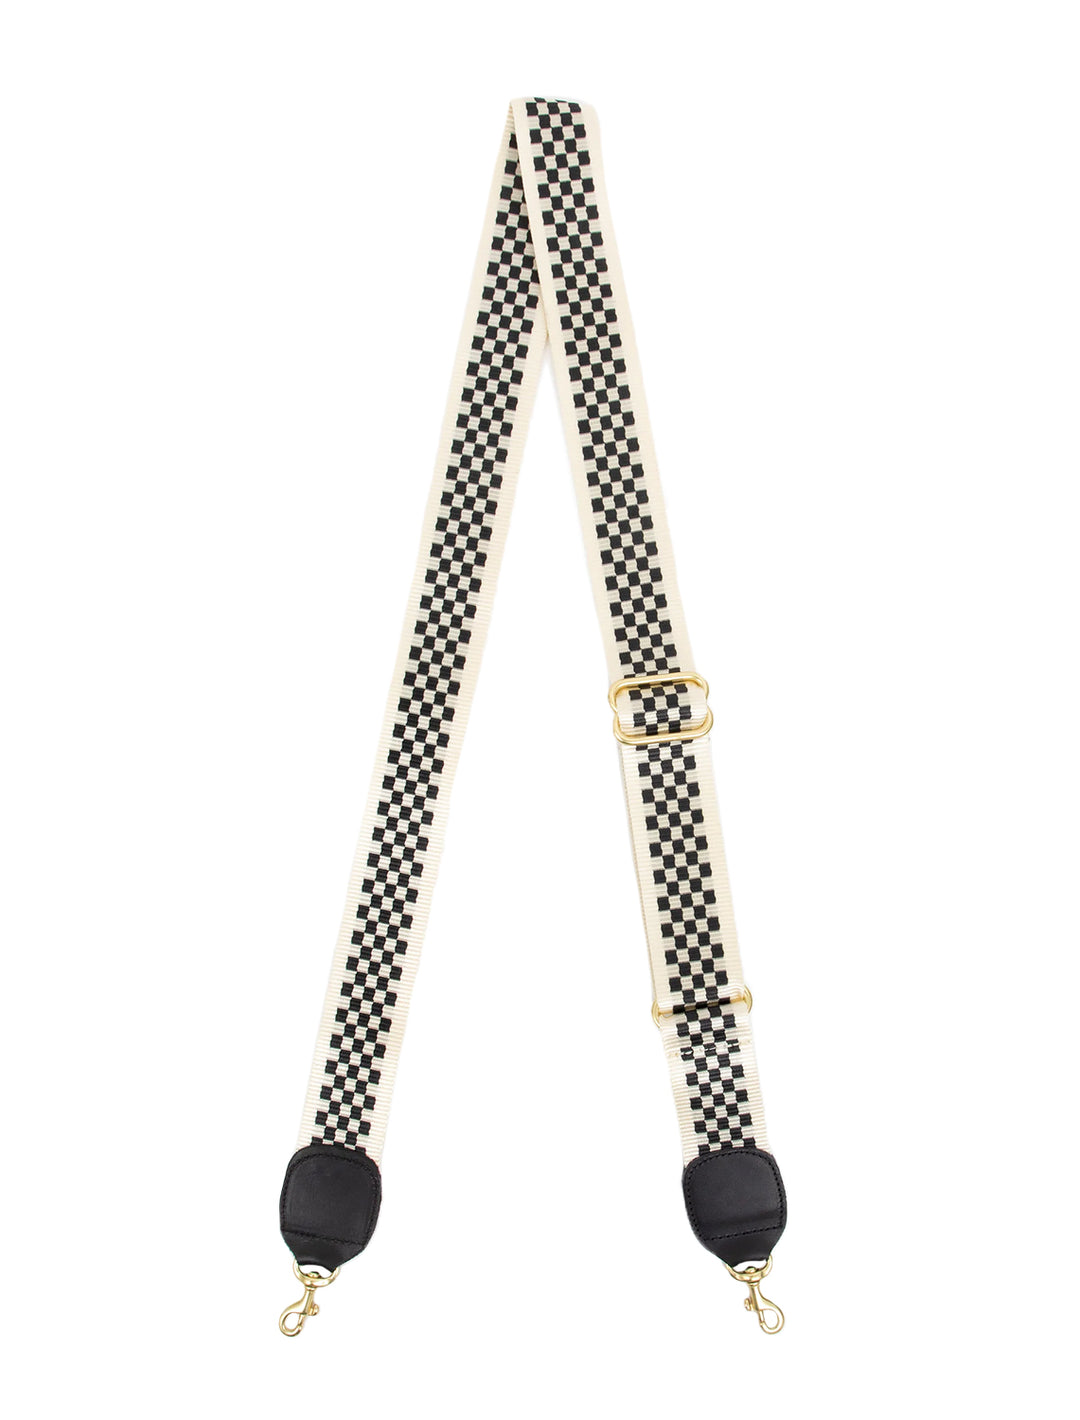 Front view of Clare V.'s adjustable crossbody strap in black and cream checker.